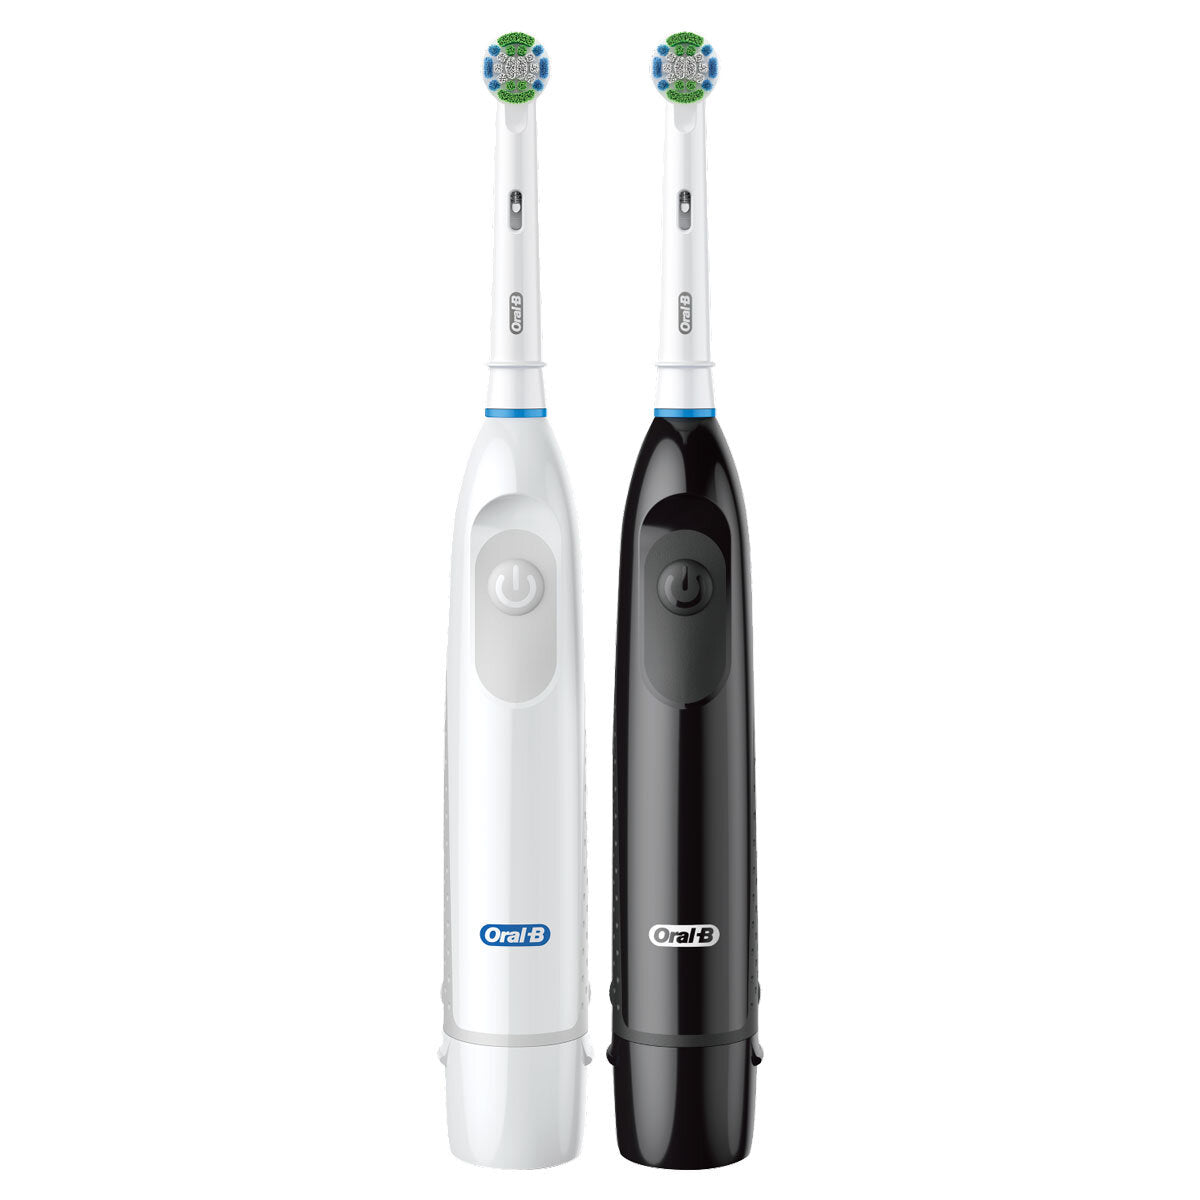 Buy now from NonynanaEssential  Oral-B DB5 Battery Toothbrush, 2 Pack Oral-B